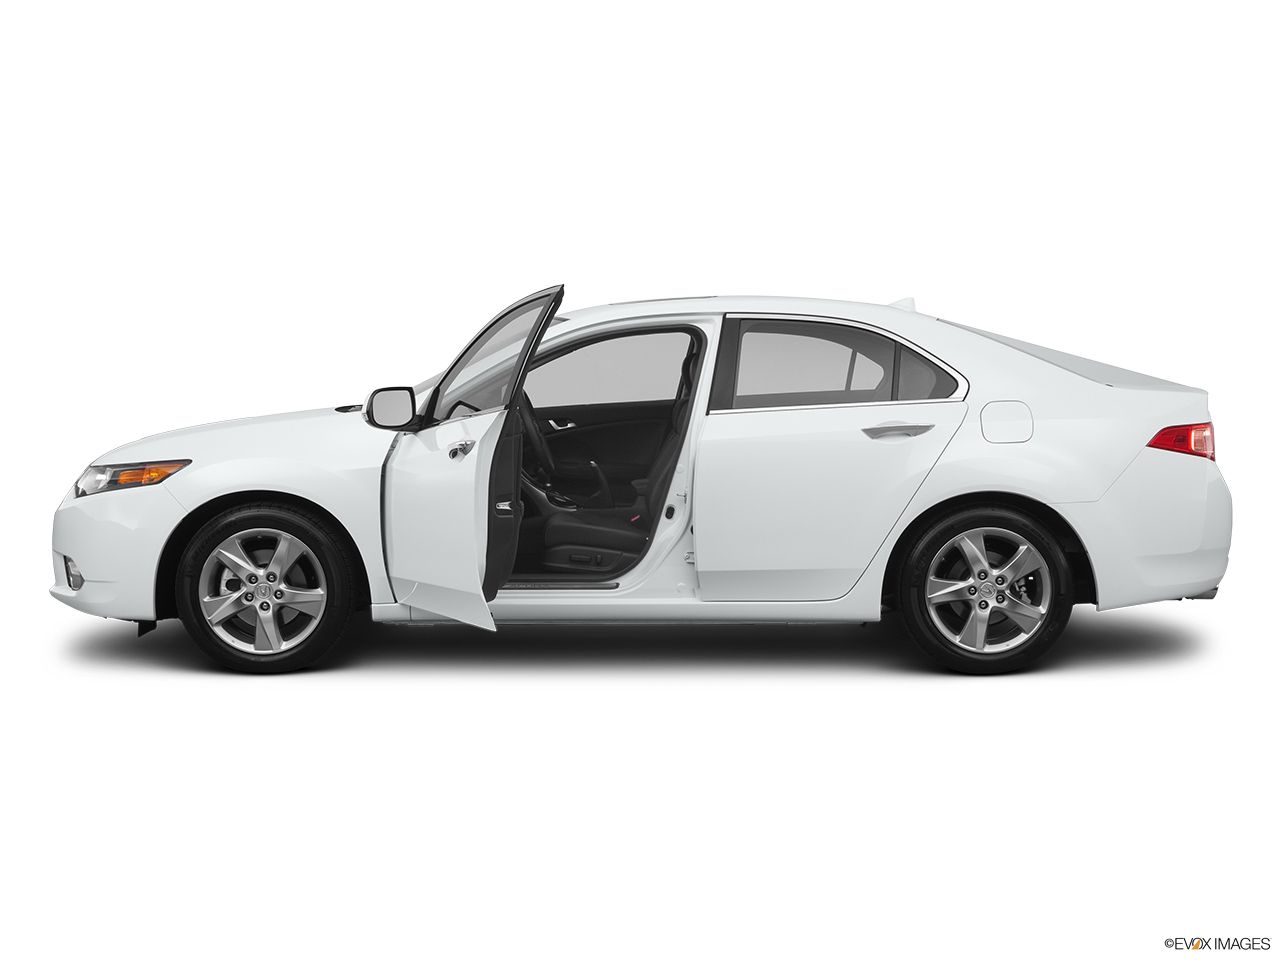 2011 Acura TSX TSX 5-speed Automatic Driver's side profile with drivers side door open. 